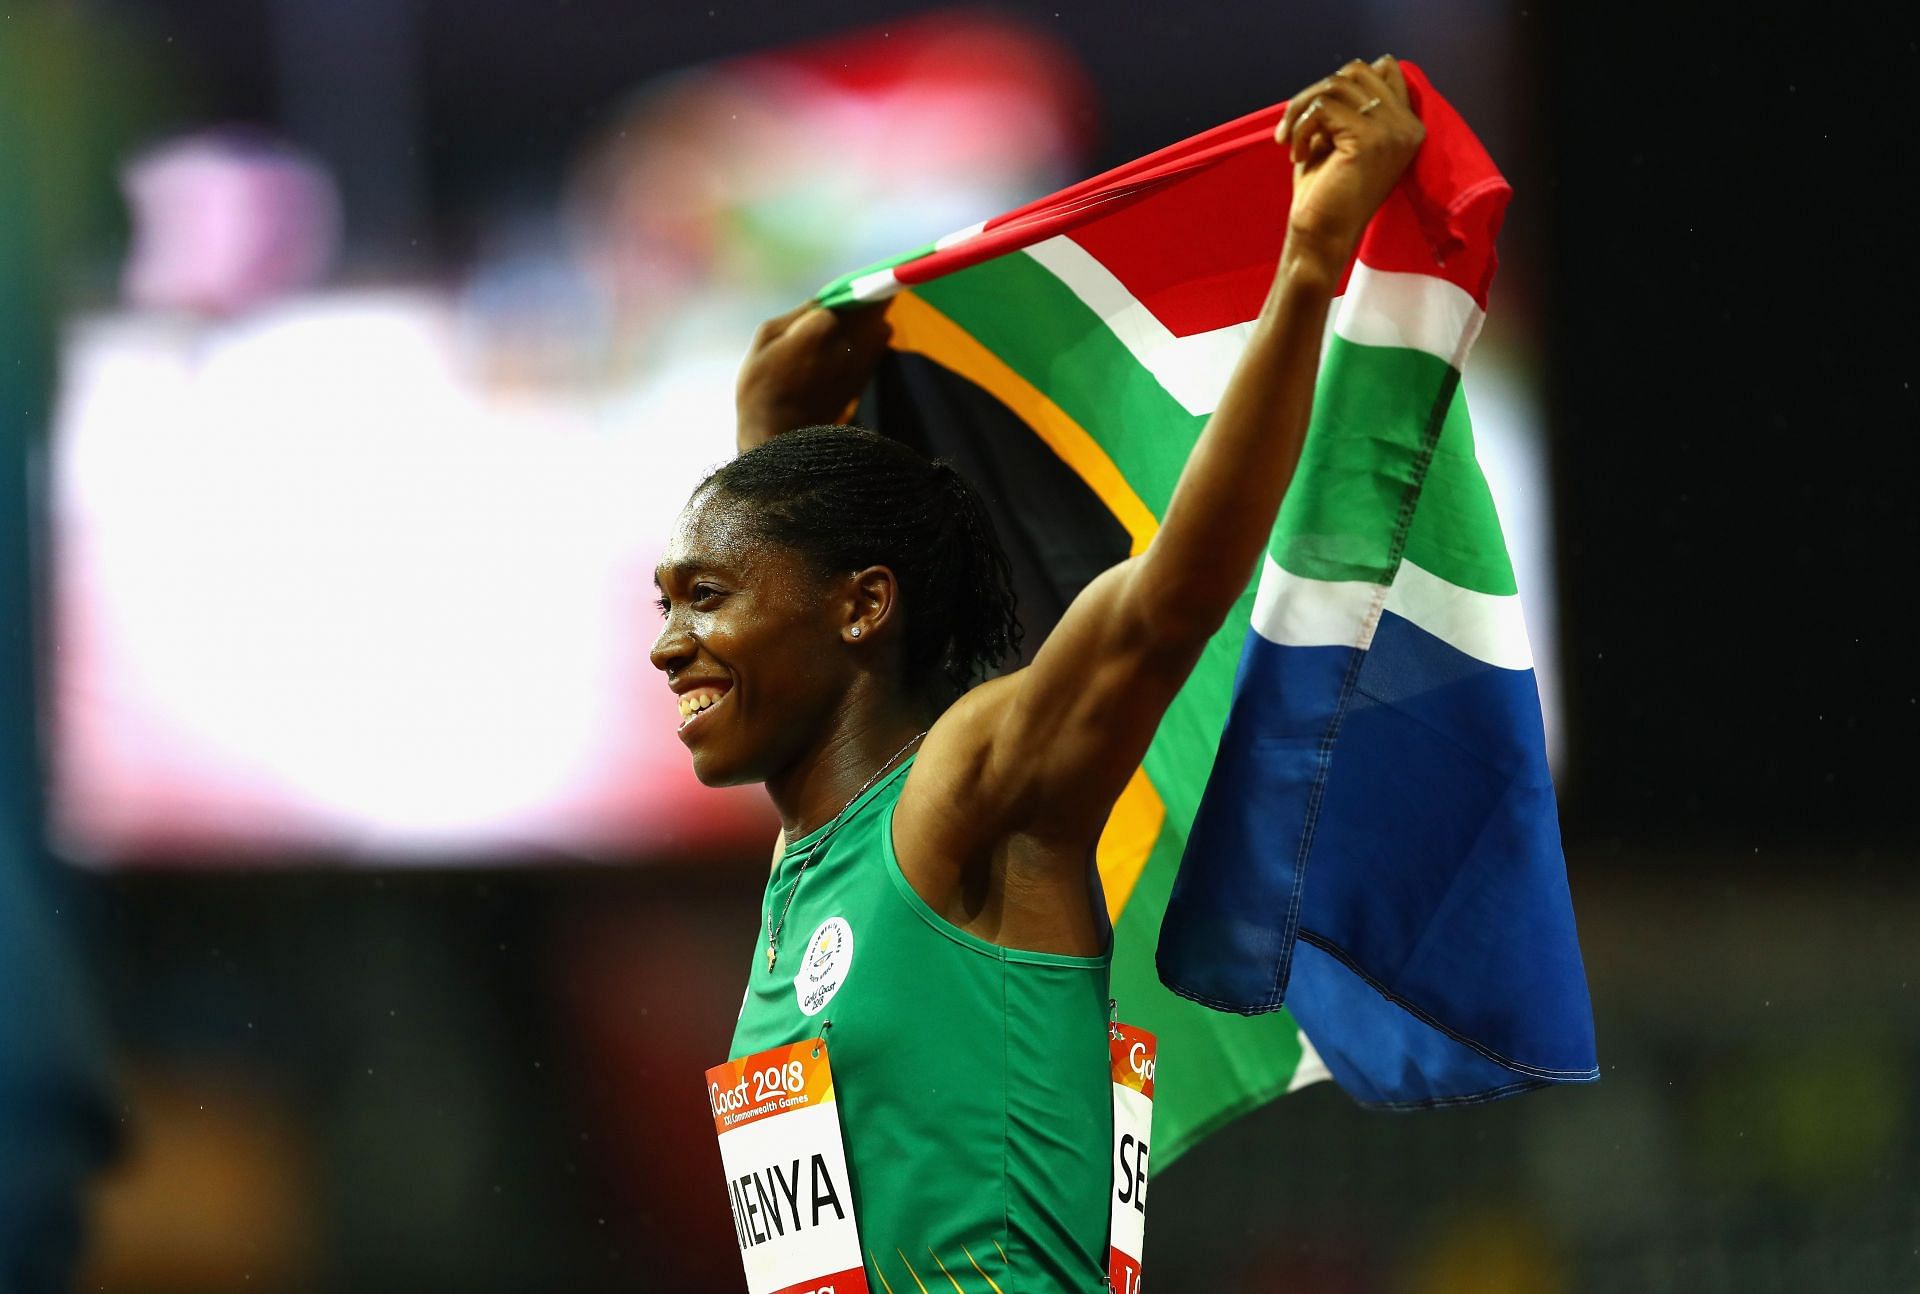 Caster Semenya celebrates winning gold in the Women&#039;s 1500 meters final during the 2018 Commonwealth Games in Gold Coast, Australia